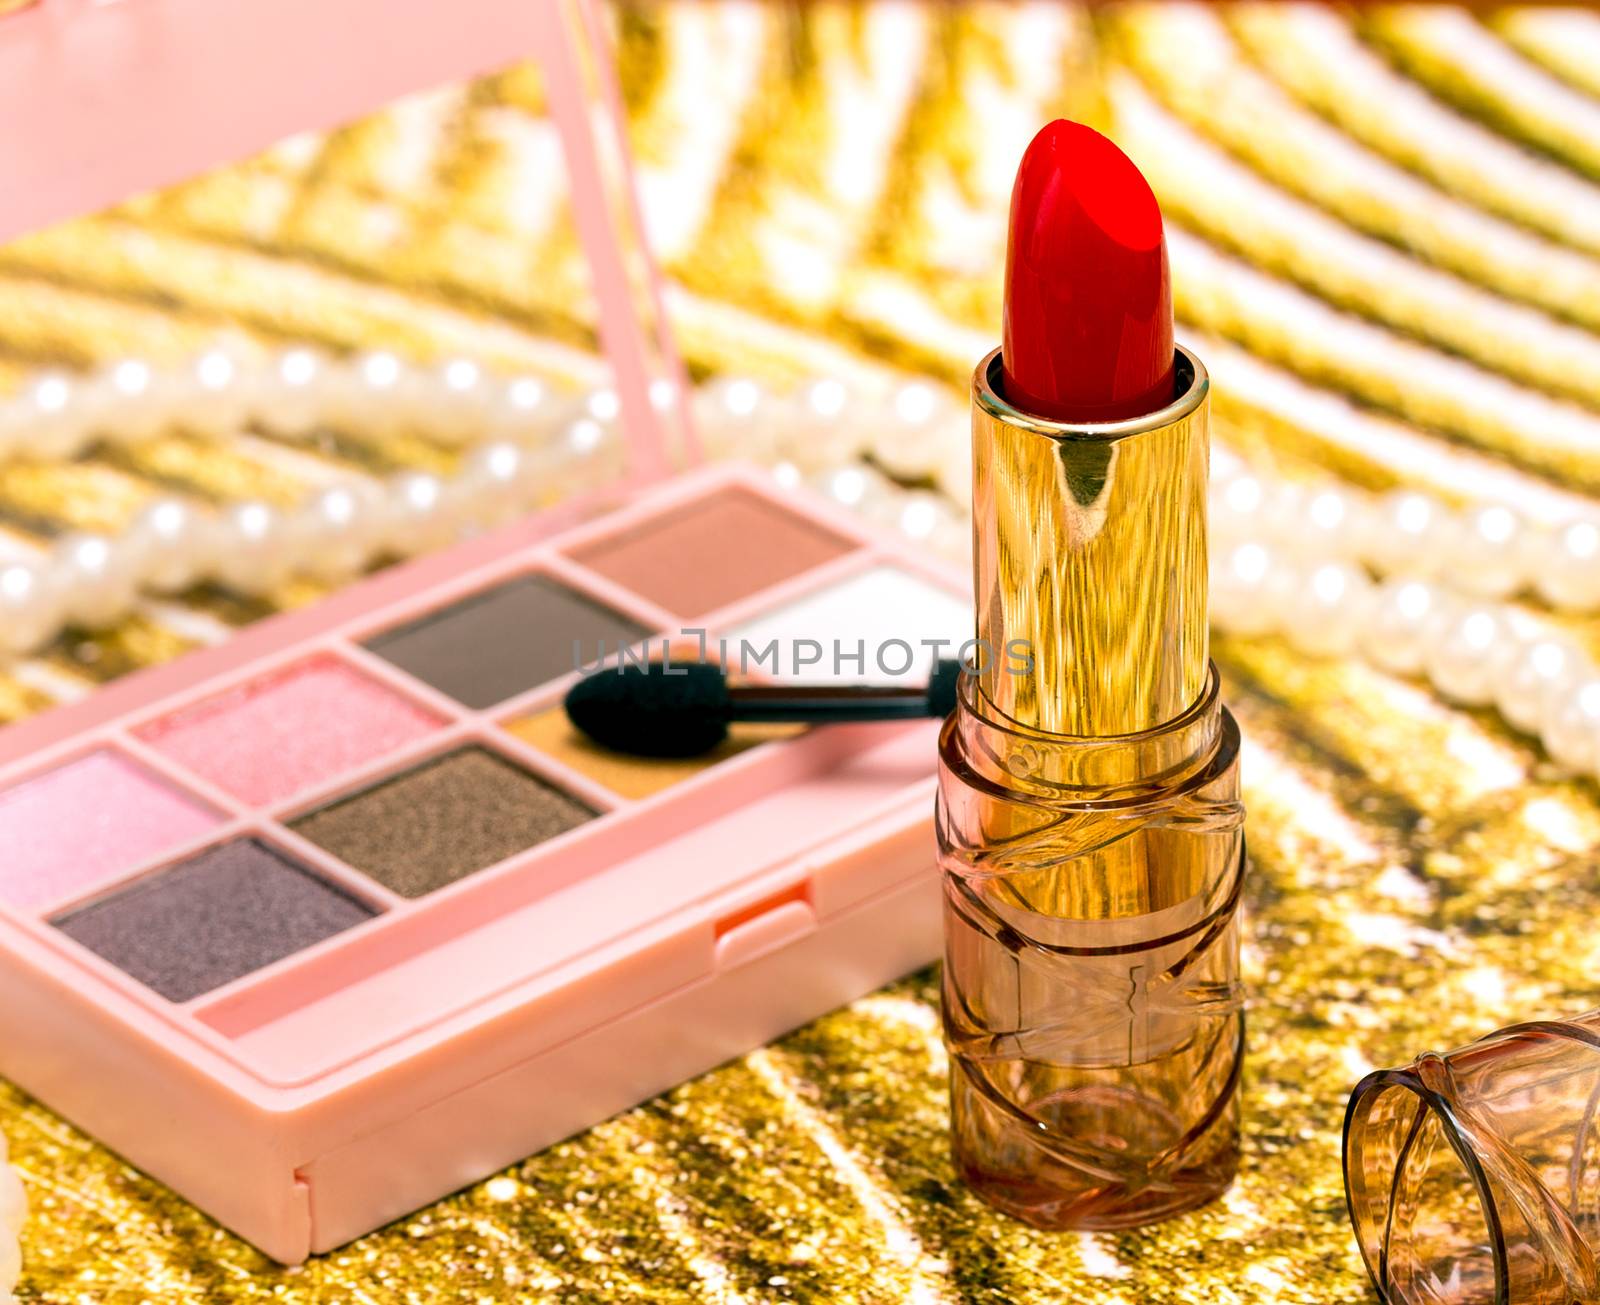 Makeup Red Lipstick Showing Beauty Products And Lipsticks